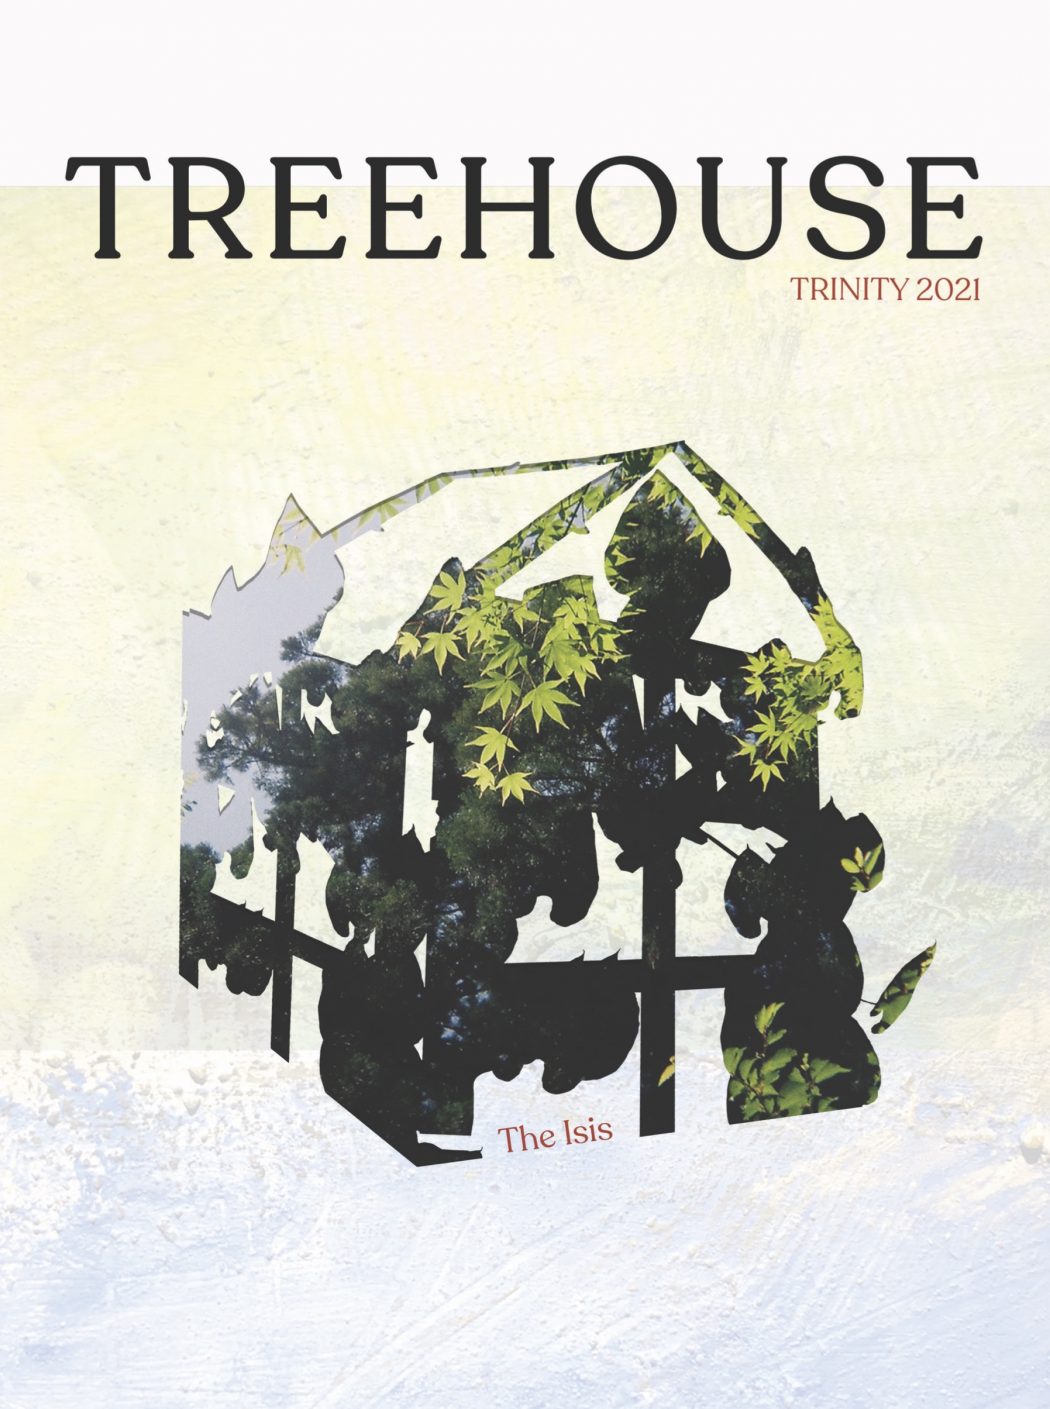 The words 'TREEHOUSE Trinity 2021' against a textured white and yellow background, above a cut-out image of a treehouse.